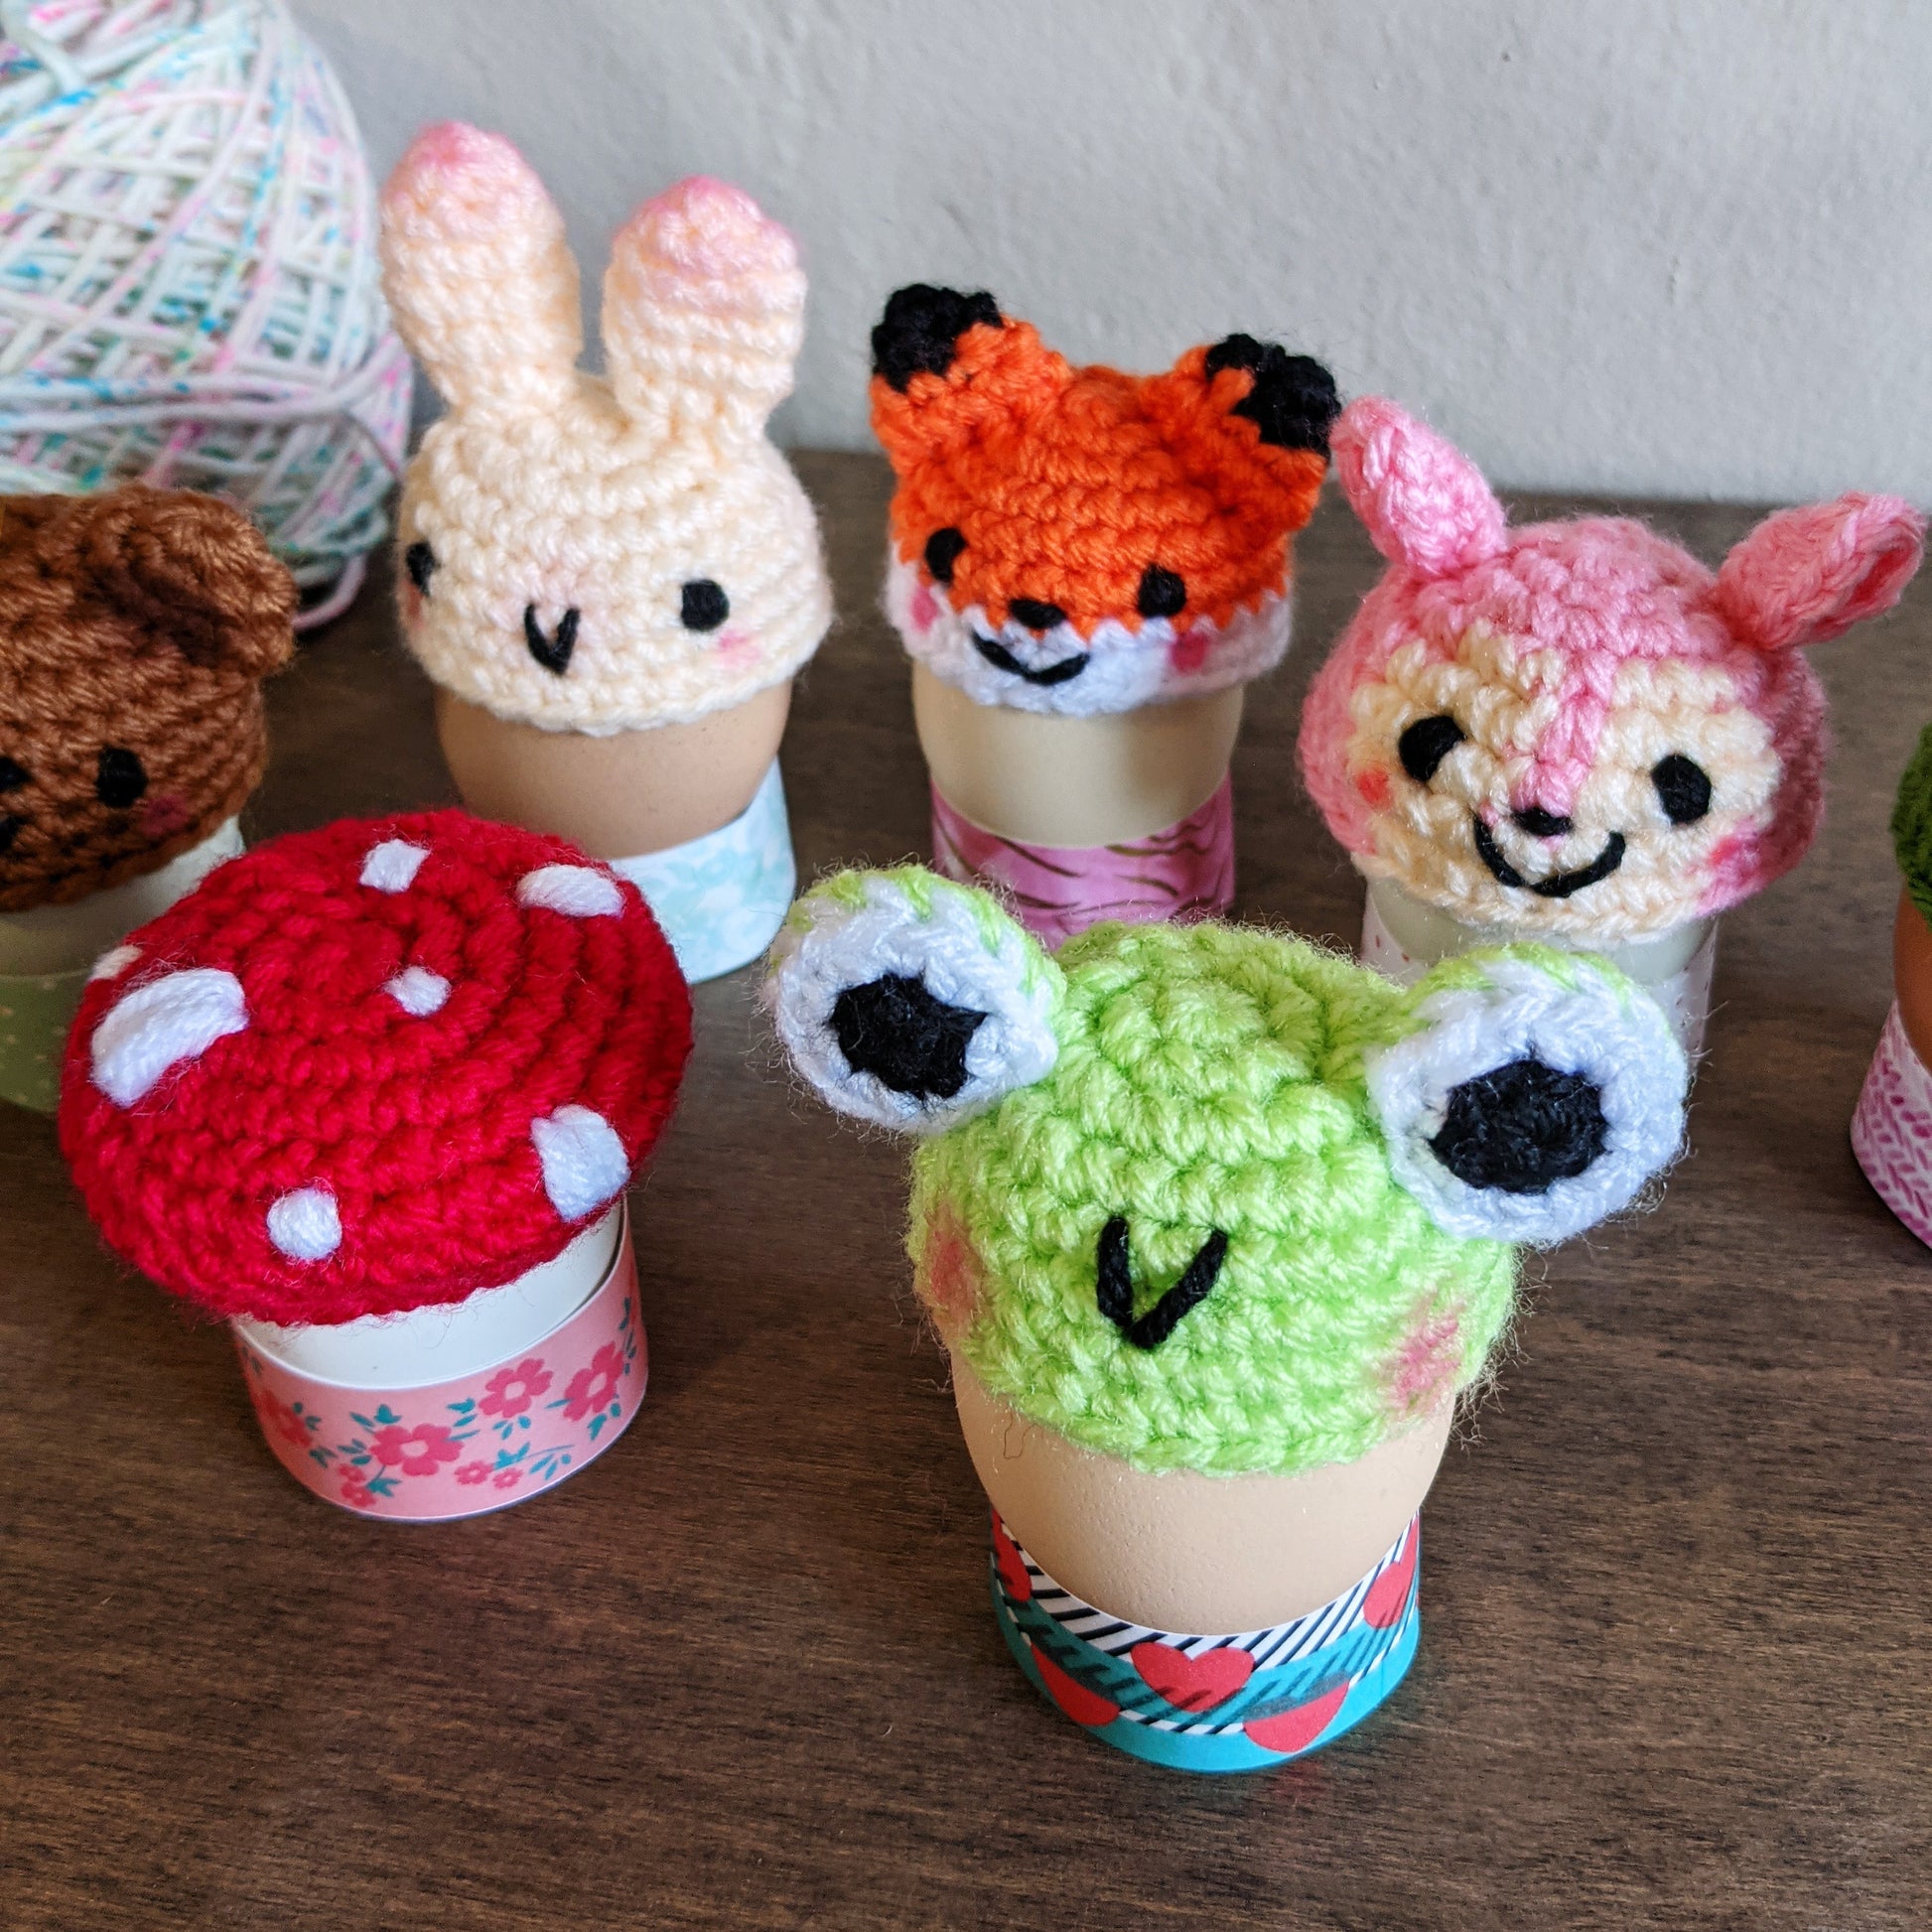 10 Easy and Adorable Free Easter Crochet Patterns — Blog.NobleKnits